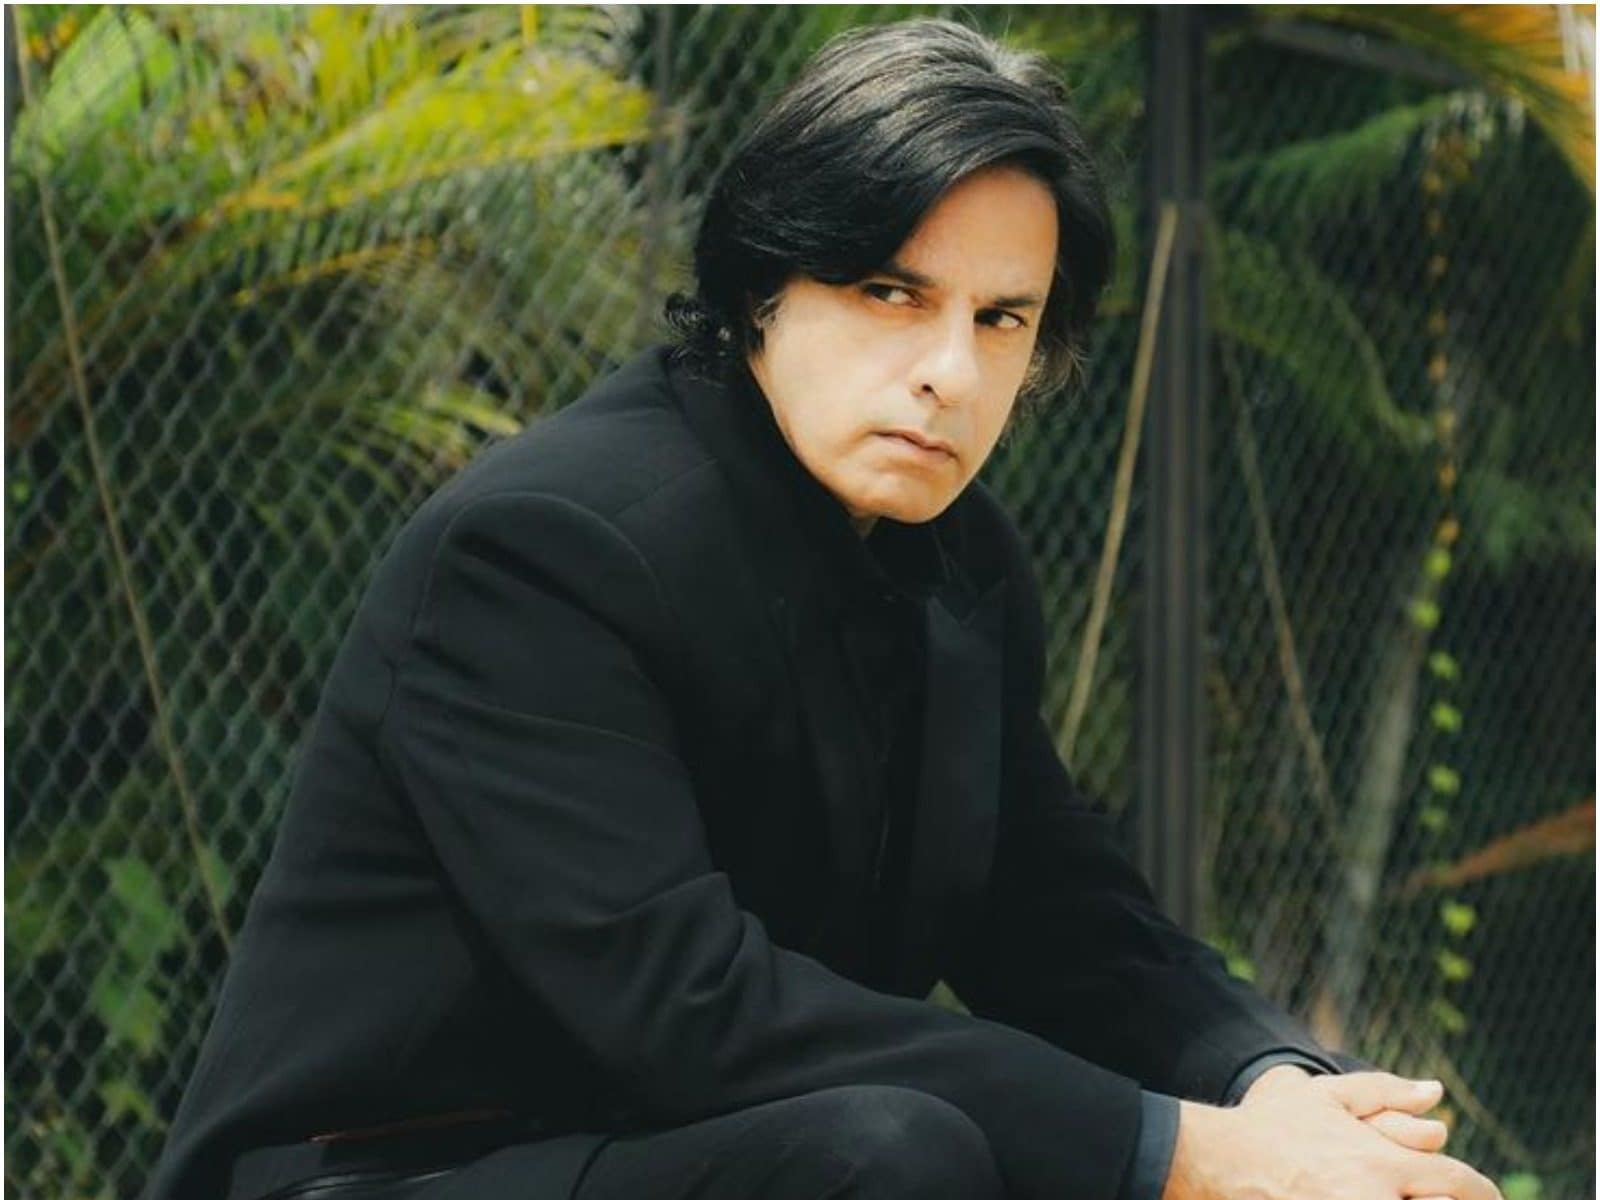 Rahul Roy gets discharged, to play stroke victim in new film titled Stroke  – India TV